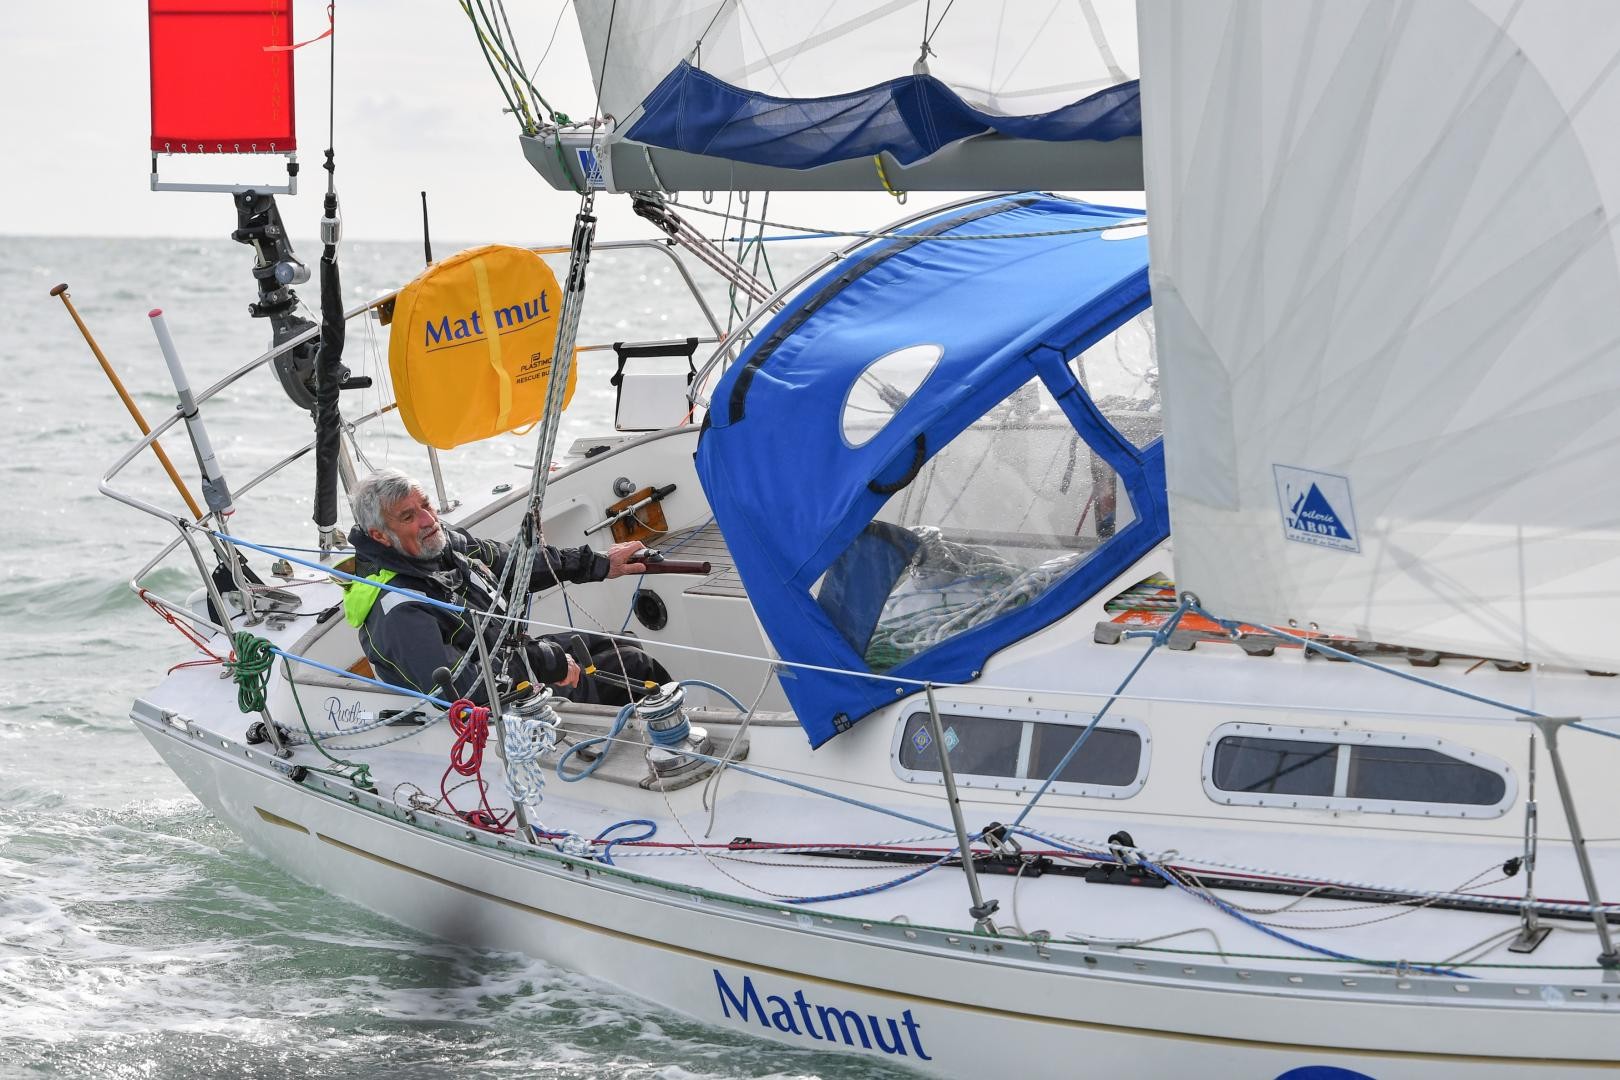 Jean-Luc Van Den Heede has suffered further damage to the mast on MATMUT and must sail with extreme caution upwind